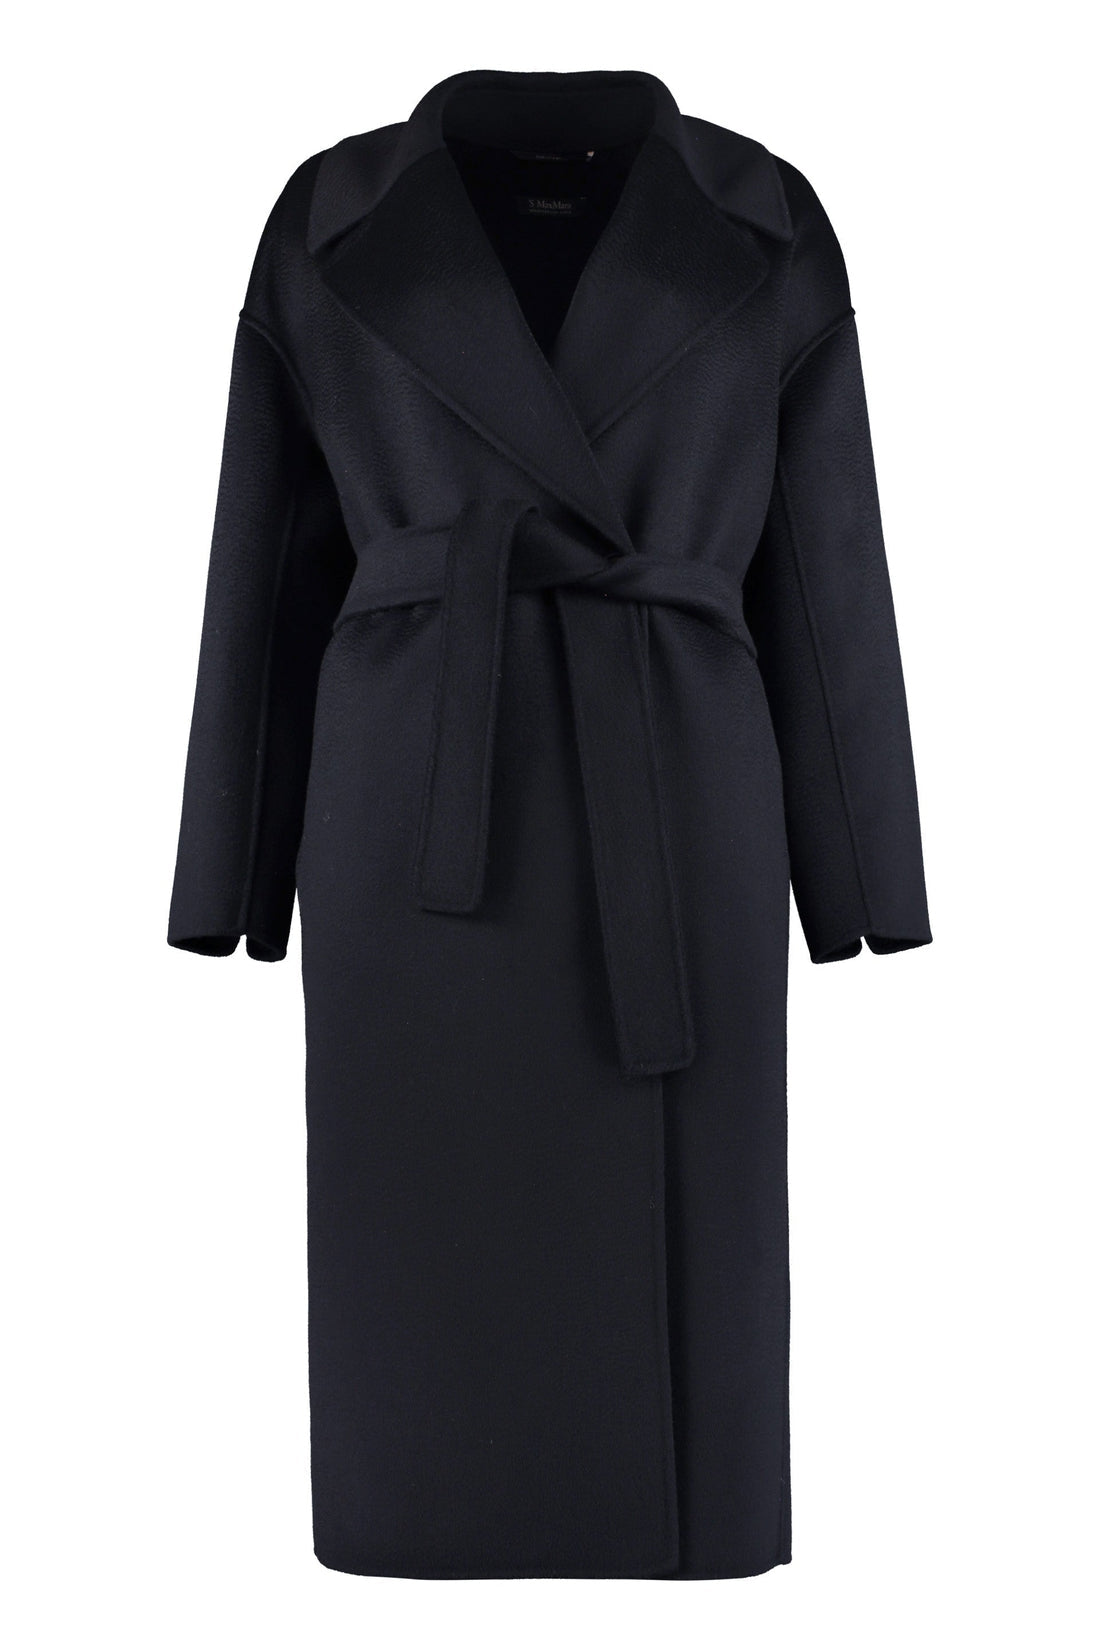 Max Mara-OUTLET-SALE-Simone double-breasted wool and cashmere coat-ARCHIVIST